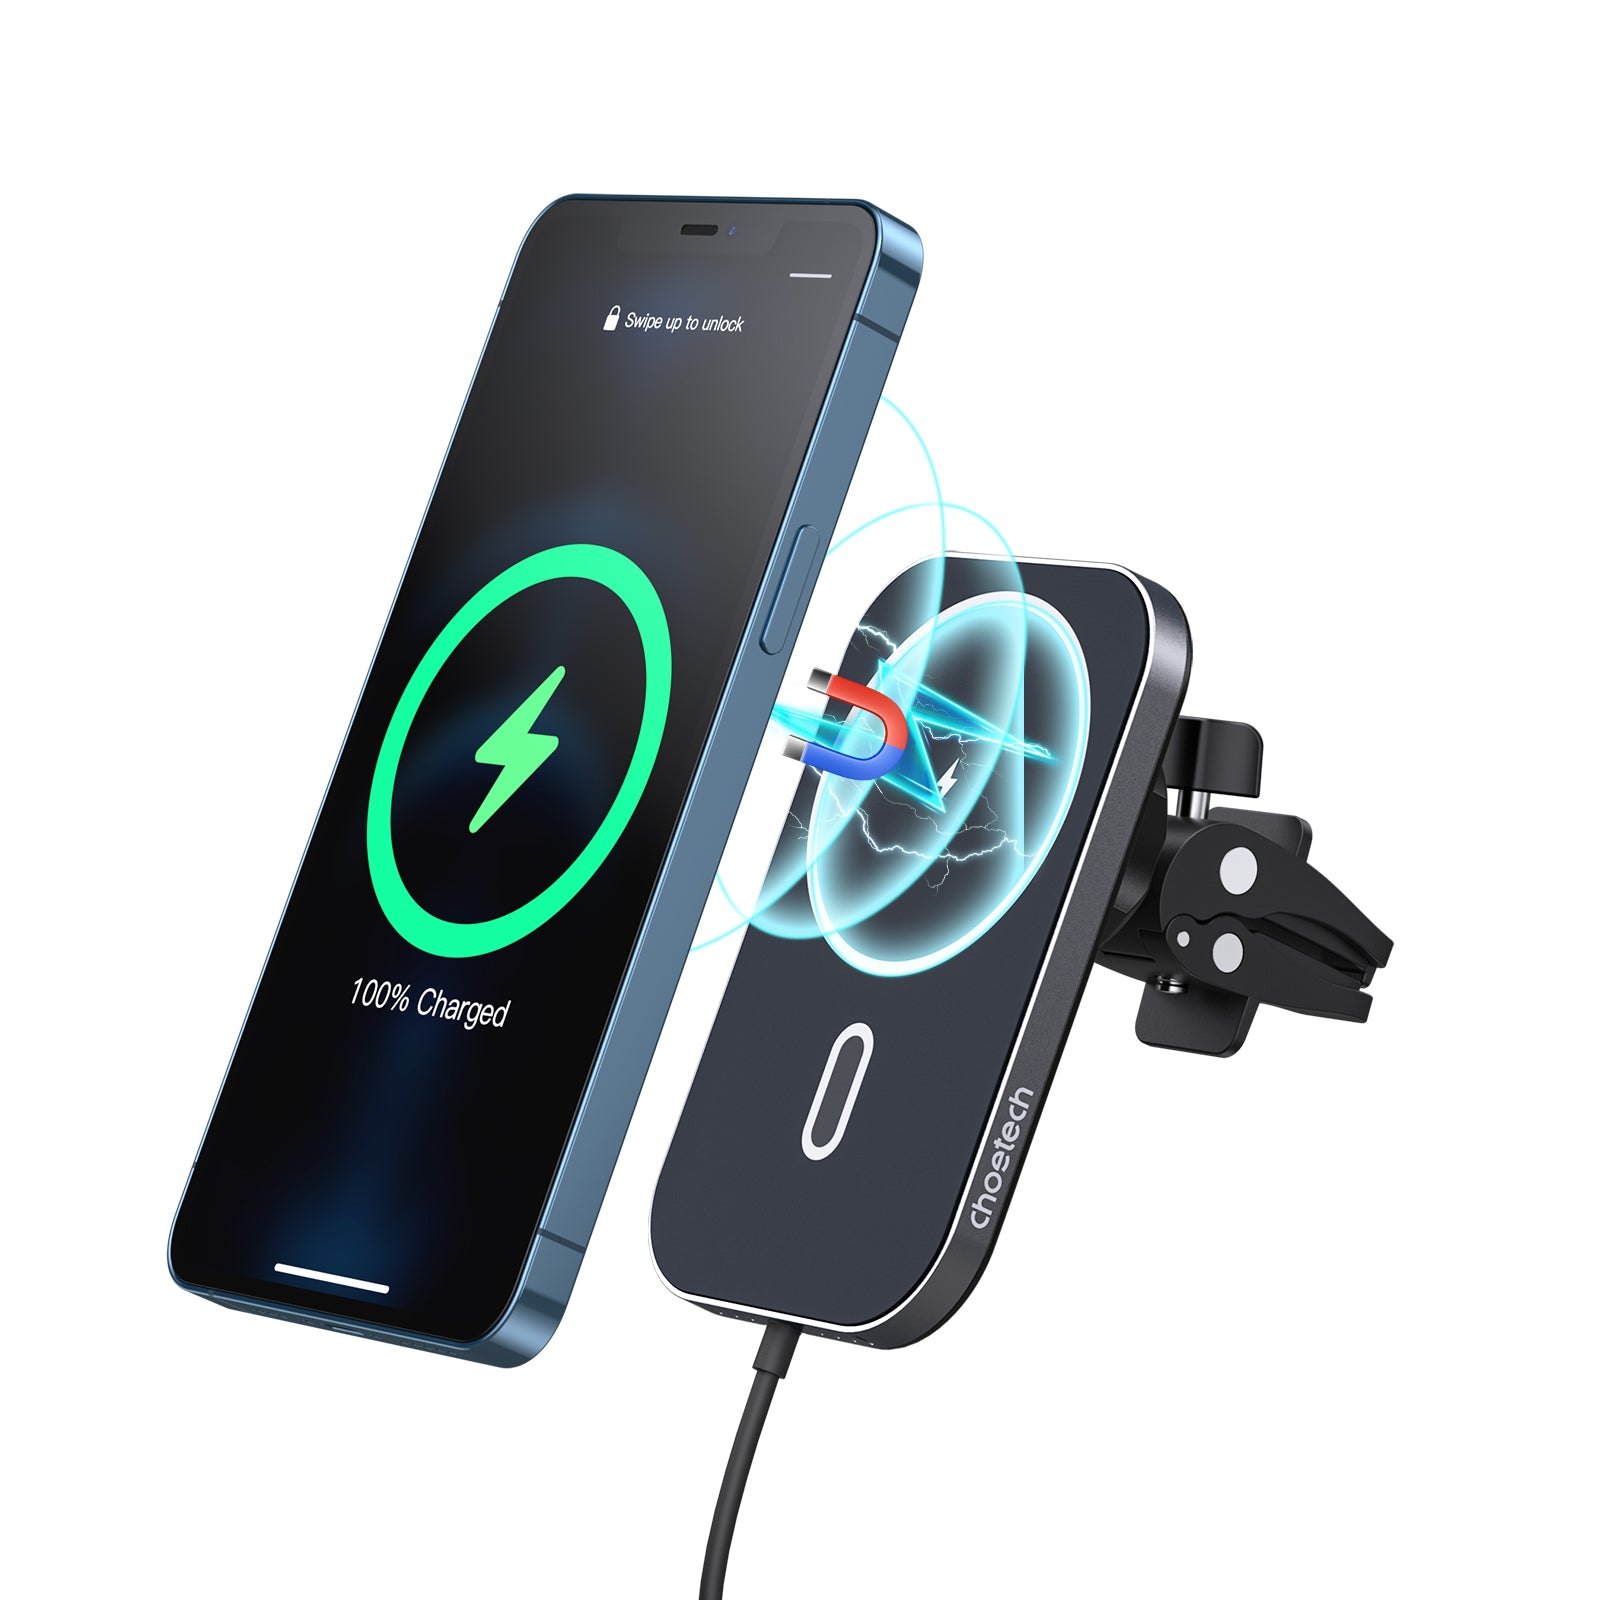 Wireless Car Charger - 10W Fast Charging, Vent Mount